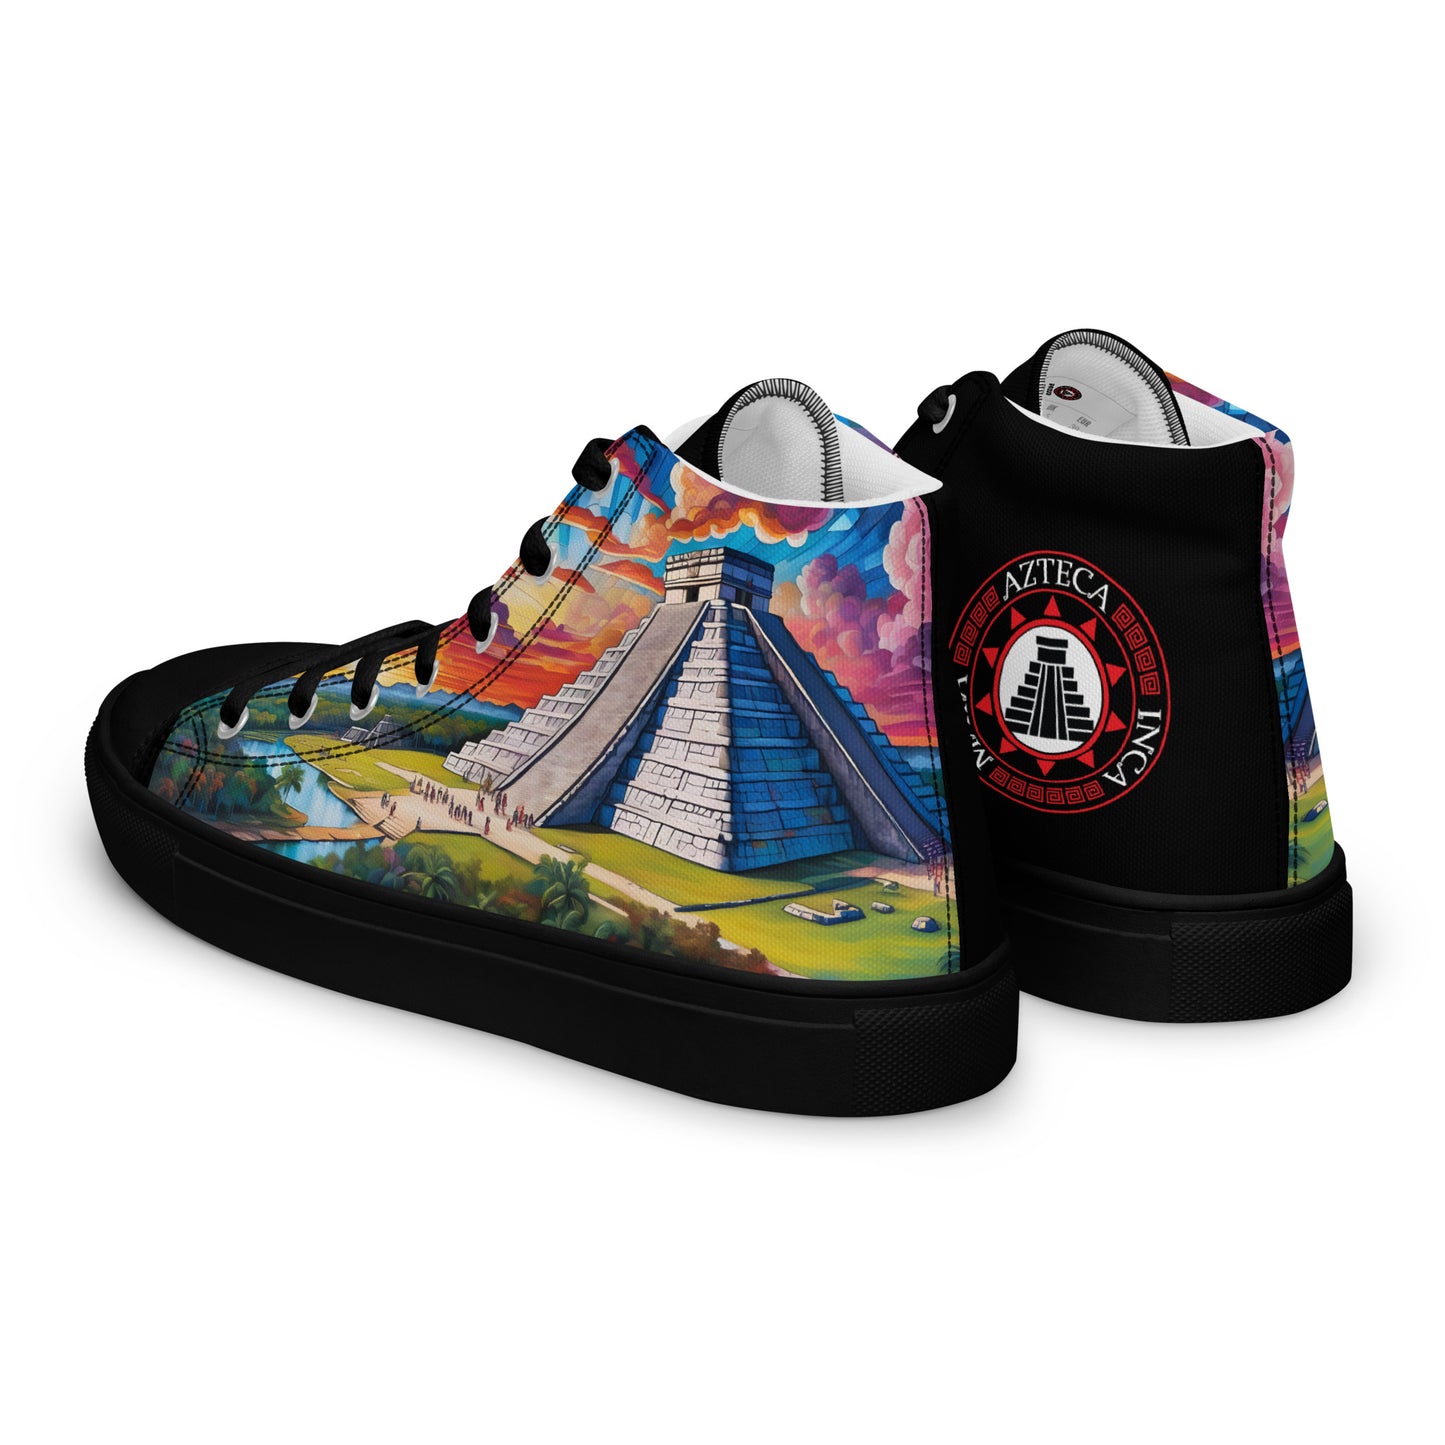 Chichén Itzá - Stained glass - Men - Black - High top shoes